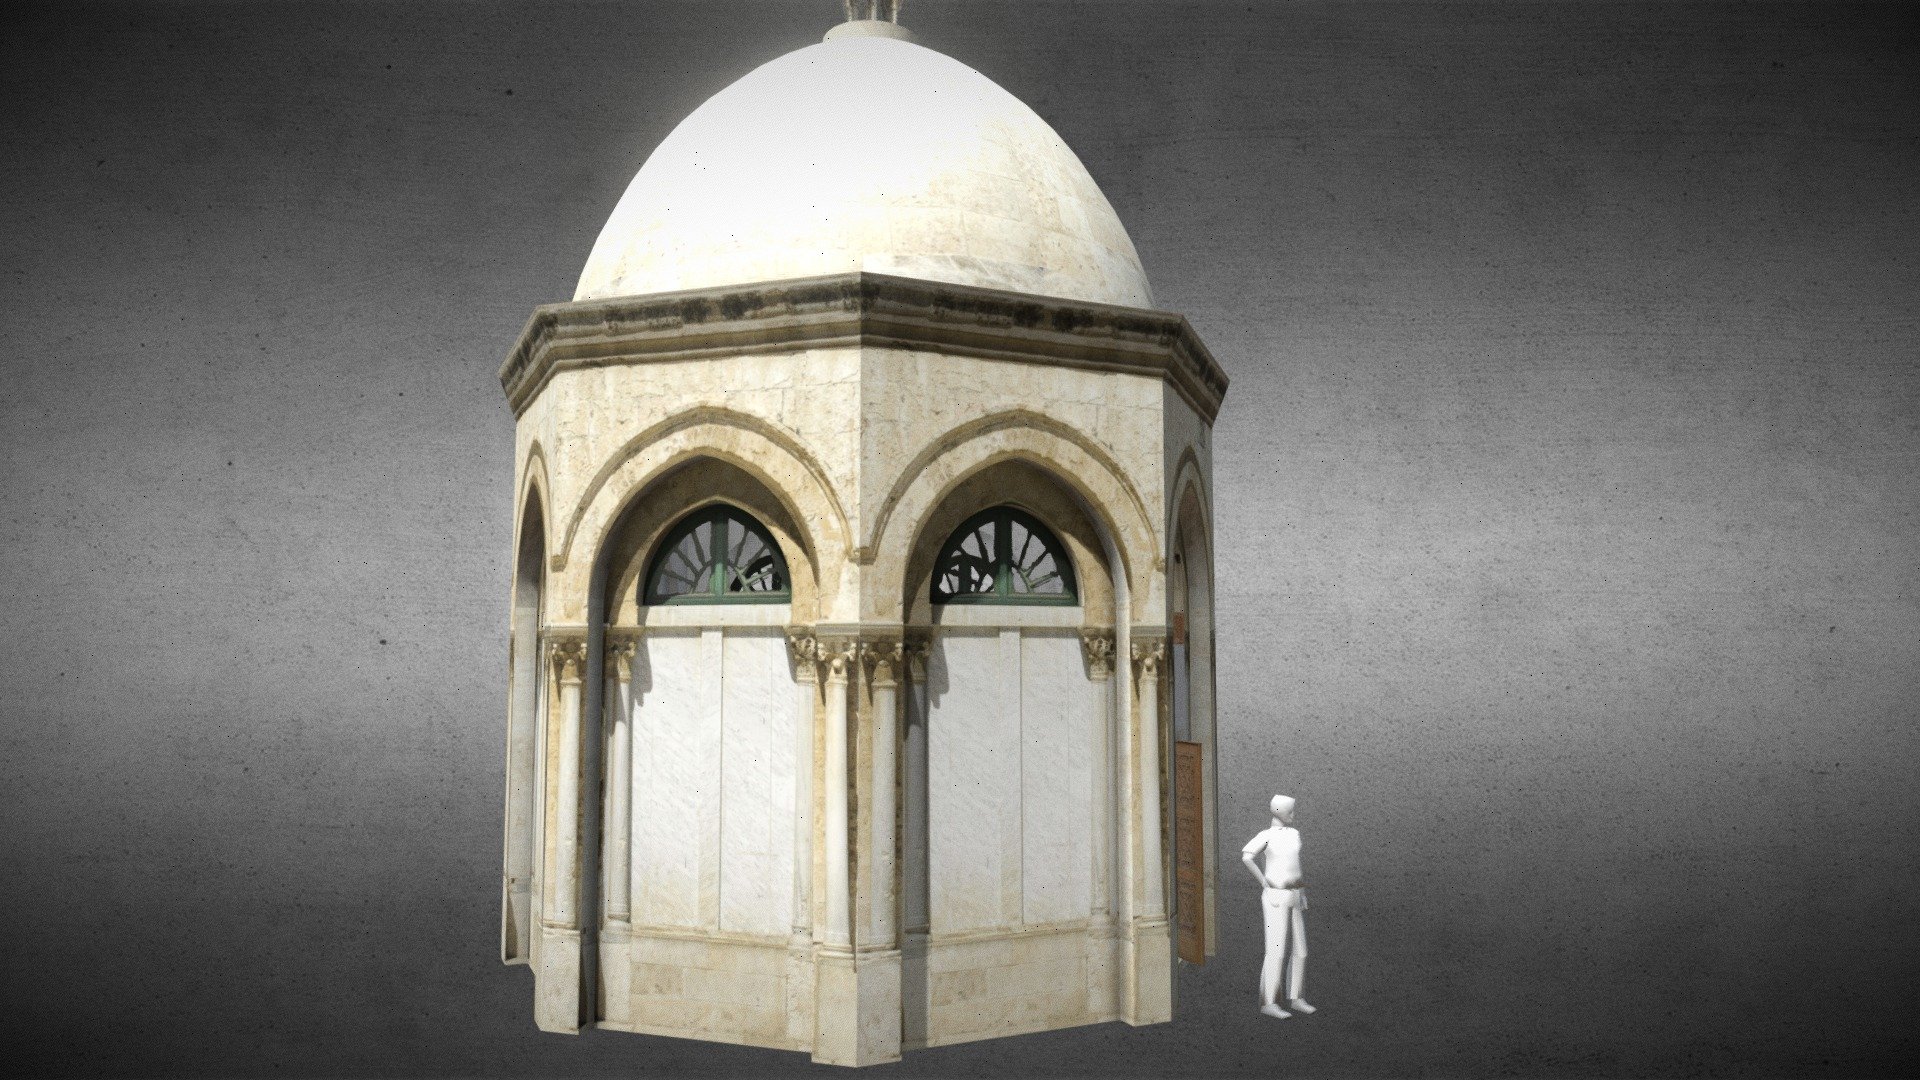 Download includes source files in SKP and KMZ formats.

View floorplans and elevations of structure.

The Dome of the Ascension (Arabic: قبة المعراج‎ Qubbat al-Miraj; Hebrew: כִּיפָּת הַעֲלִיָּיה‬ Kippat Ha'Aliyah) is a small, free-standing domed structure built by Crusaders that stands just north the Dome of the Rock on the Temple Mount in Jerusalem.

Although called &ldquo;Dome of the Ascension